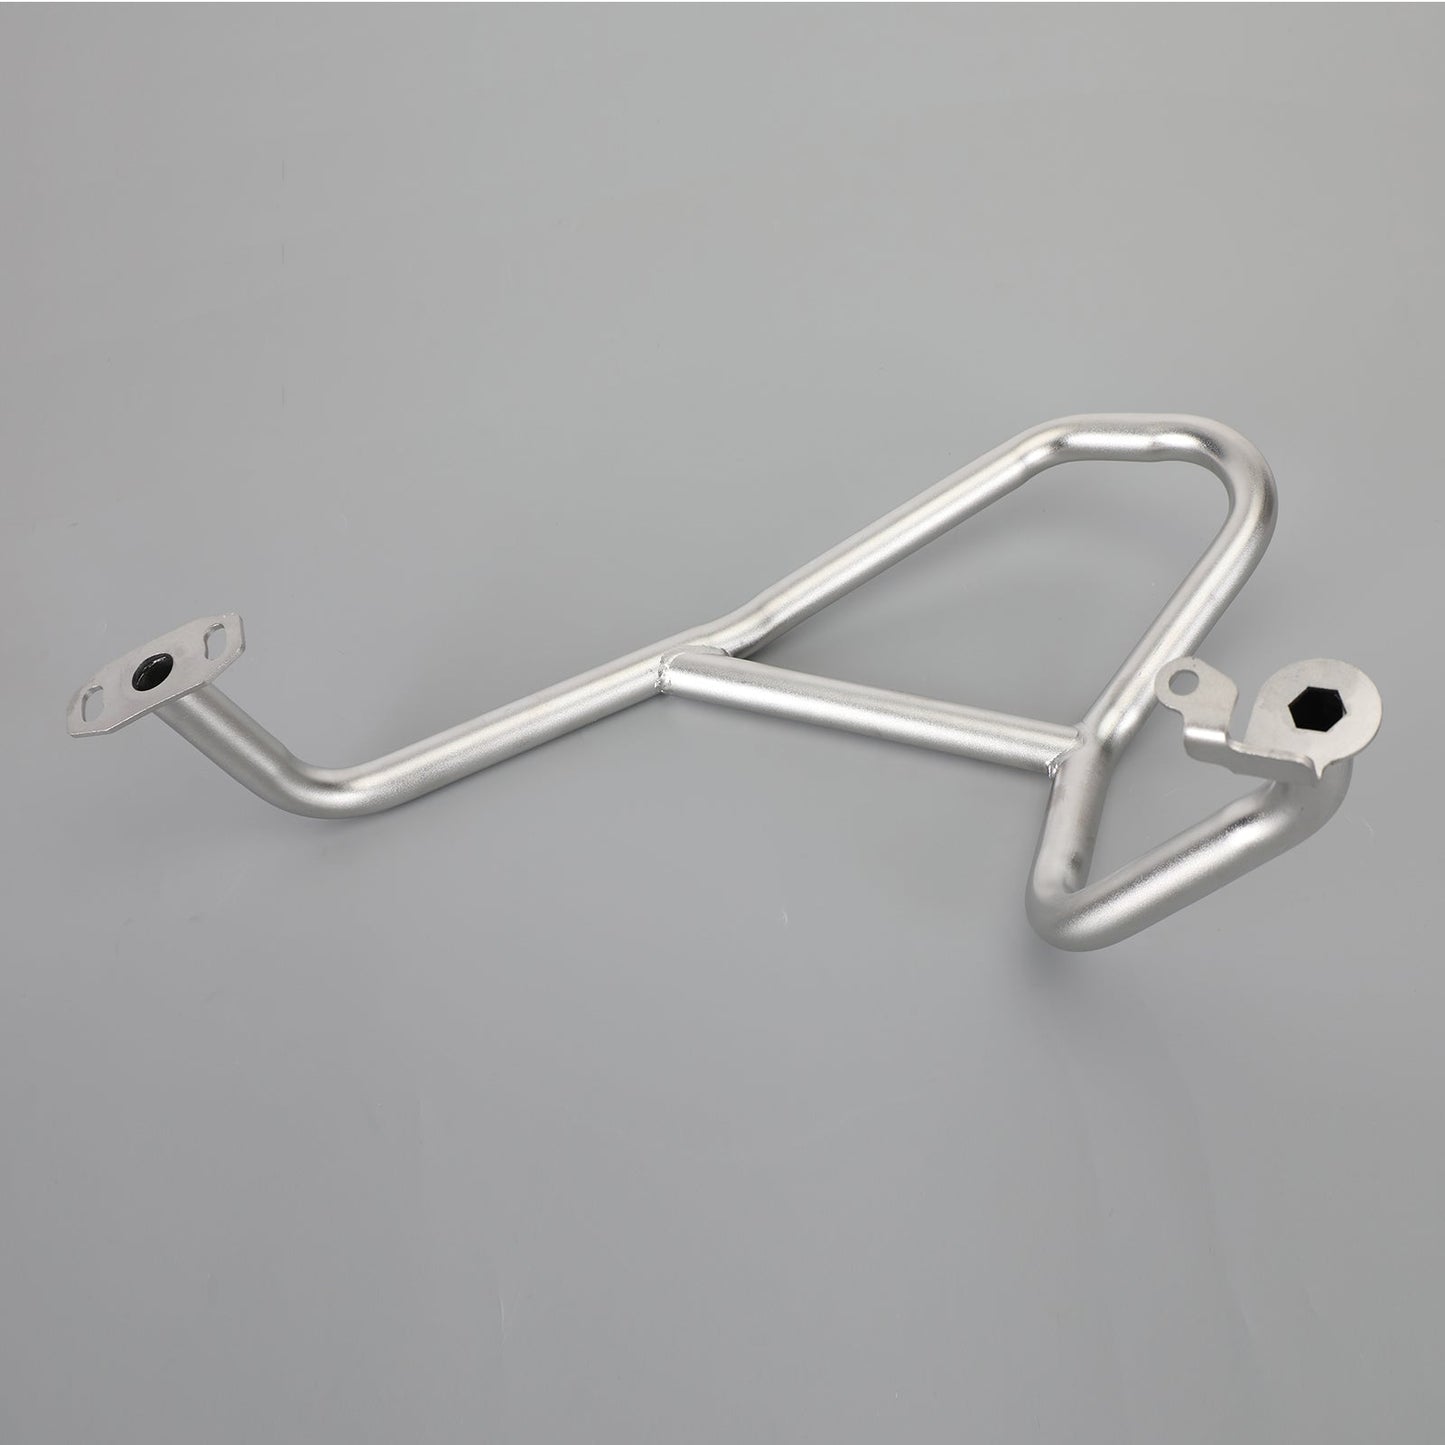 Upper Crash Bars Engine Guards Protector Silver Fit For Bmw R1250Gs 18-21 19 20